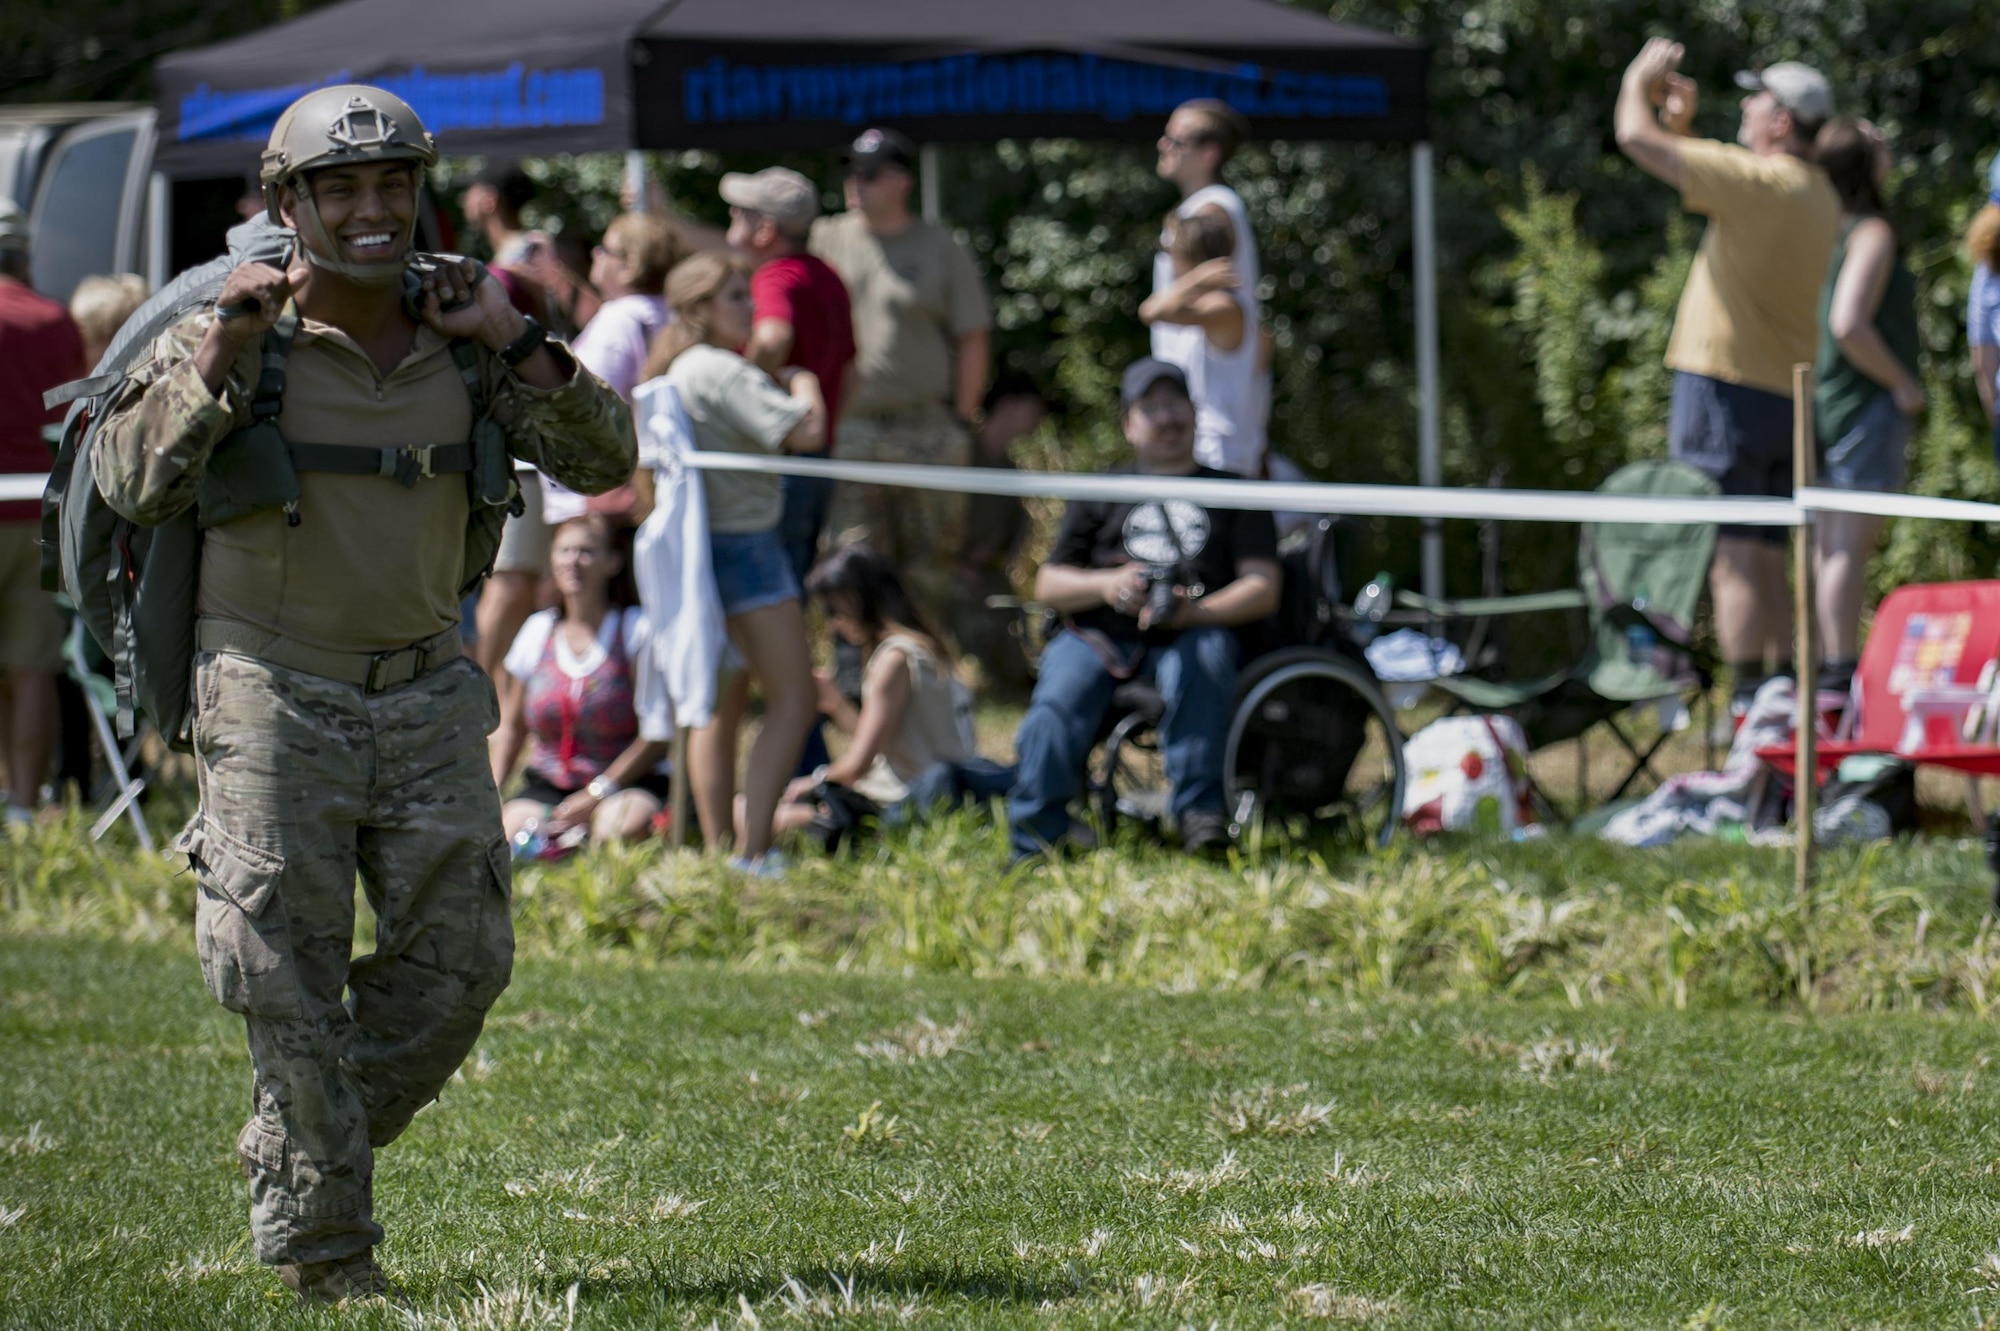 U.S. Air Force Tech. Sgt. Christopher Zavala, 822d Base Defense Squadron squad leader, carries a parachute during Leapfest, Aug. 6, 2017, in West Kingstown, R.I. The Rhode Island National guard hosted the 34th annual event, which is the largest international static line jump competition in the world. Team Moody’s Airmen represented the only U.S. sister-service team and earned second place among 70 participating teams. (U.S. Air Force photo by Airman 1st Class Daniel Snider)